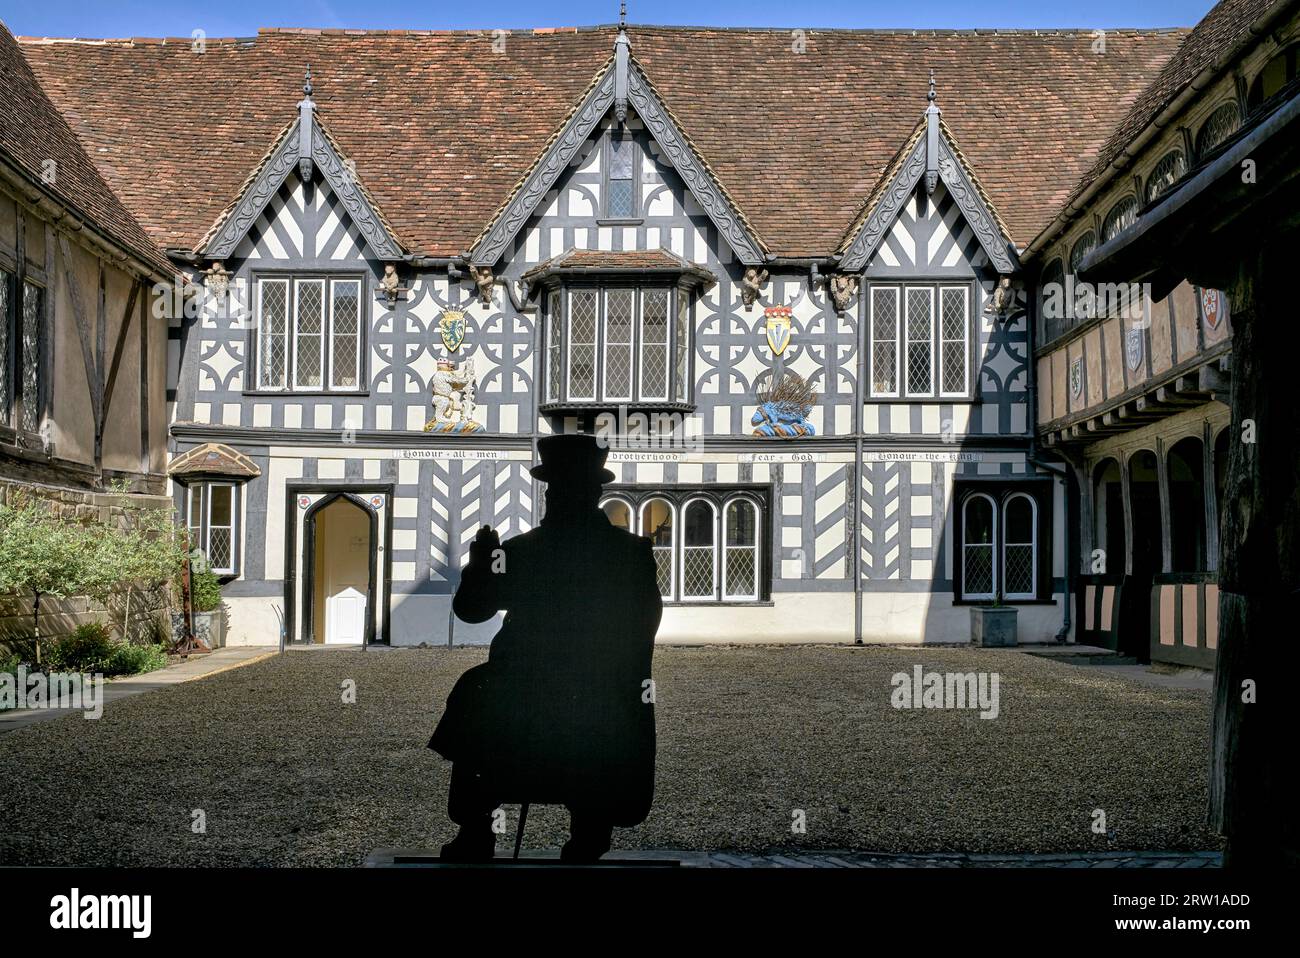 Lord Leycester Hospital and residential rest home for ex military servicemen with silhouette figure of elderly veteran resident. Warwick, England, UK Stock Photo